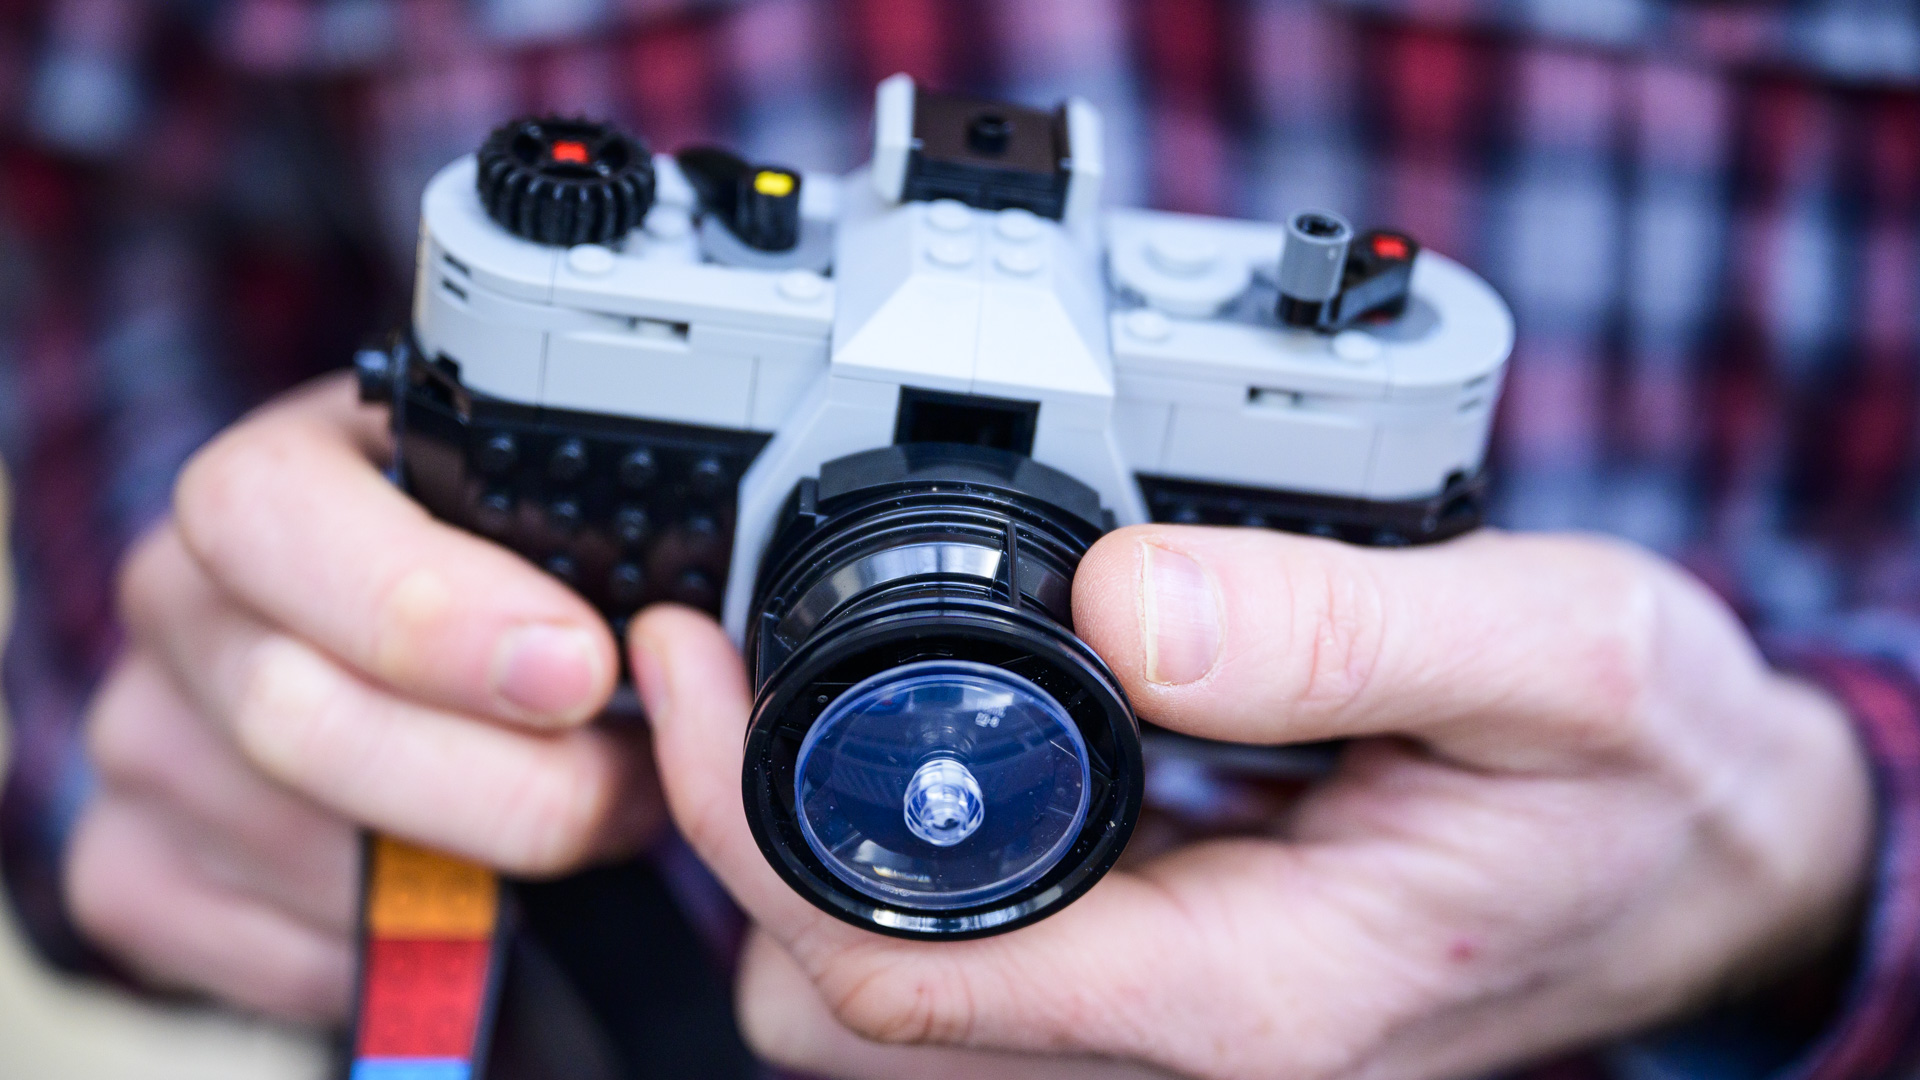 LEGO Retro Camera is fully integrated into the hand and rotates the lens